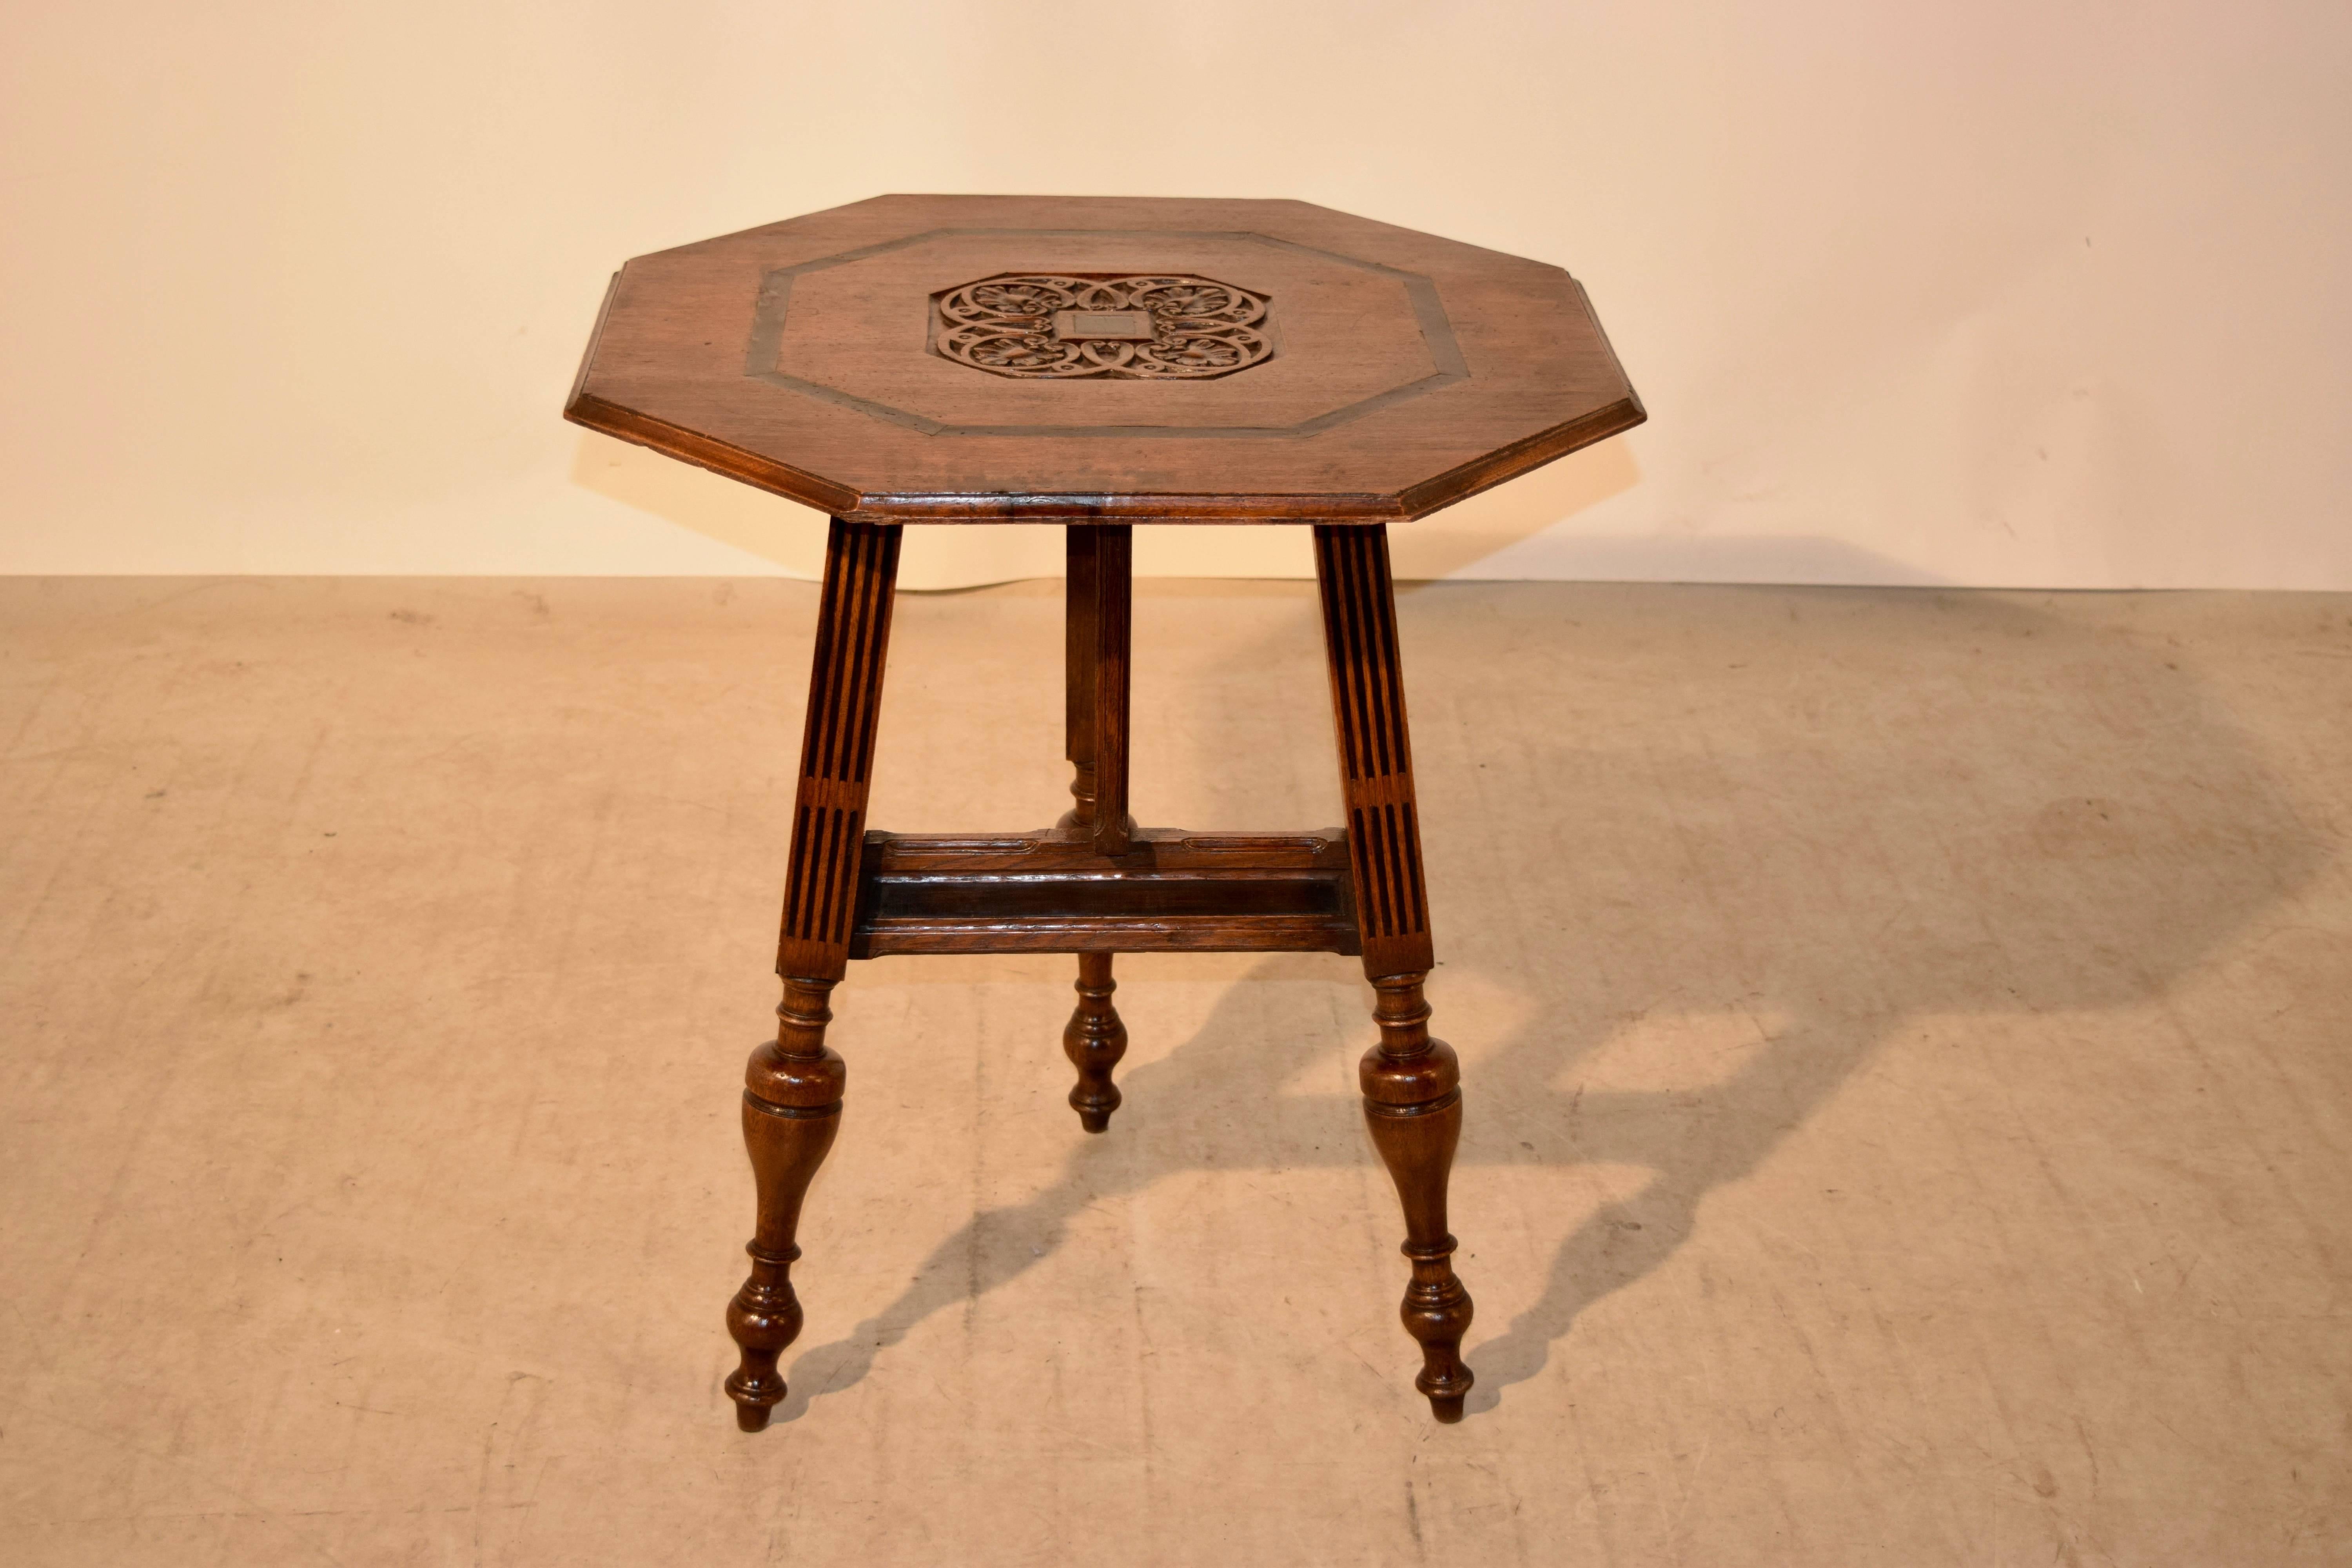 19th century Dutch oak carriage table which has a central carved medallion on the top, surrounded by ebonized banding and a bevelled edge. The base is comprised of three legs, the single which swings in flat and the tabletop tilts to completely